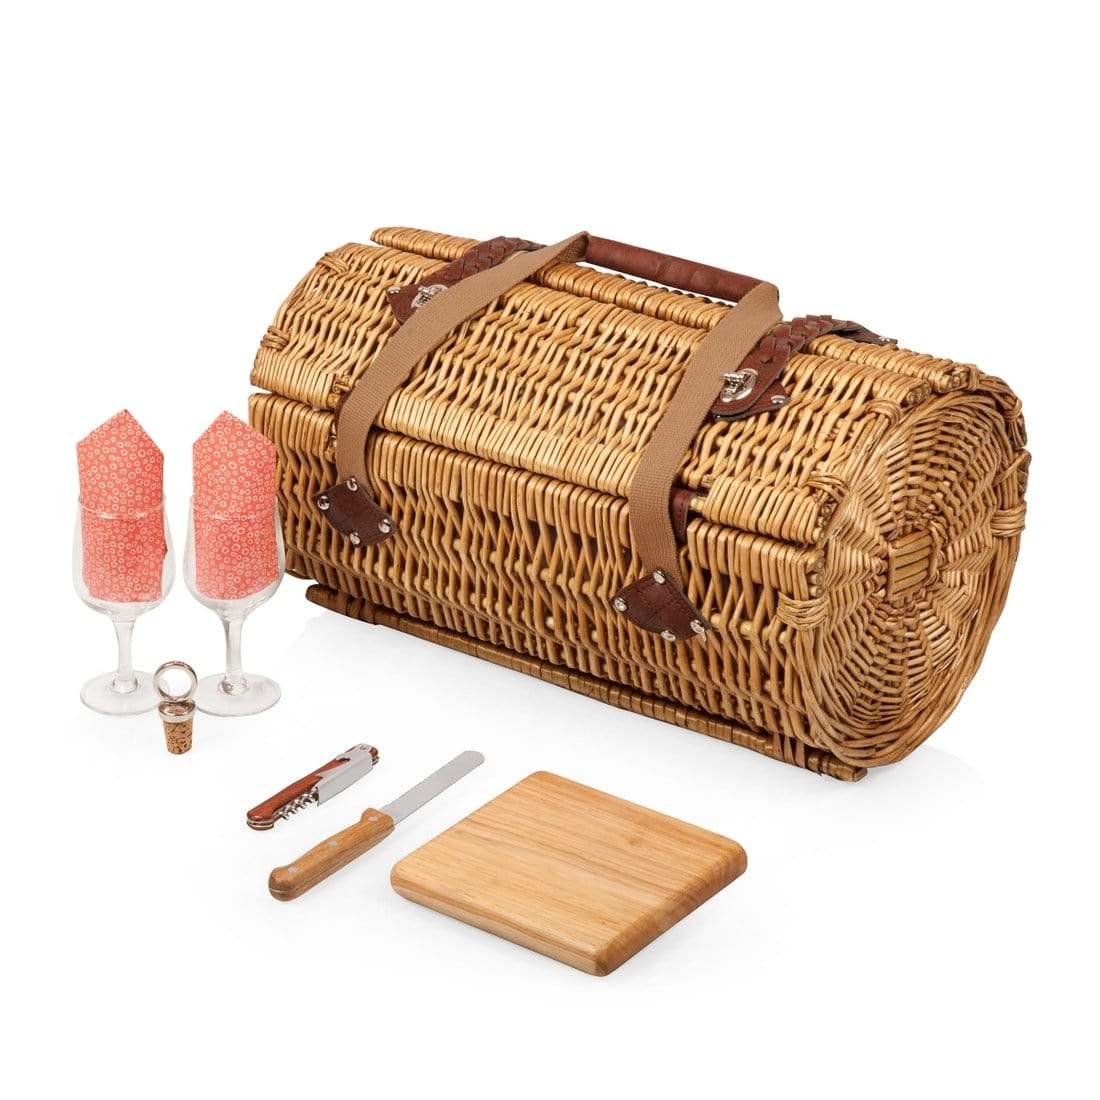  Country Wine & Cheese Picnic Basket Inspired Atelier Perfumarie